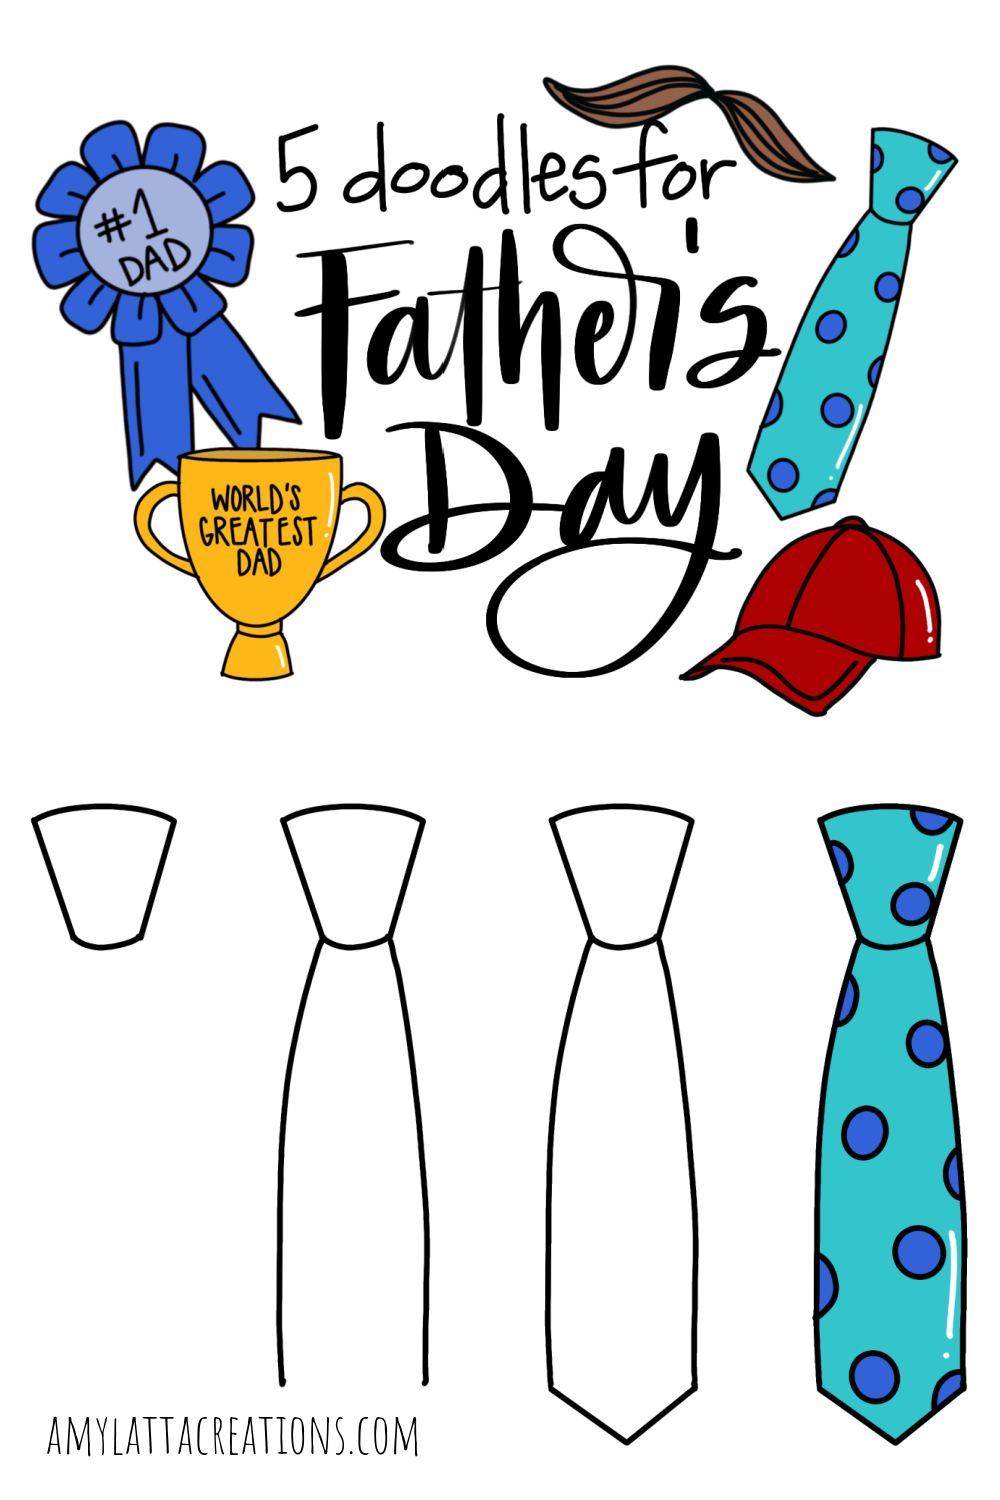 Image is a collage of doodles with the message, "5 Doodles for Father's Day".